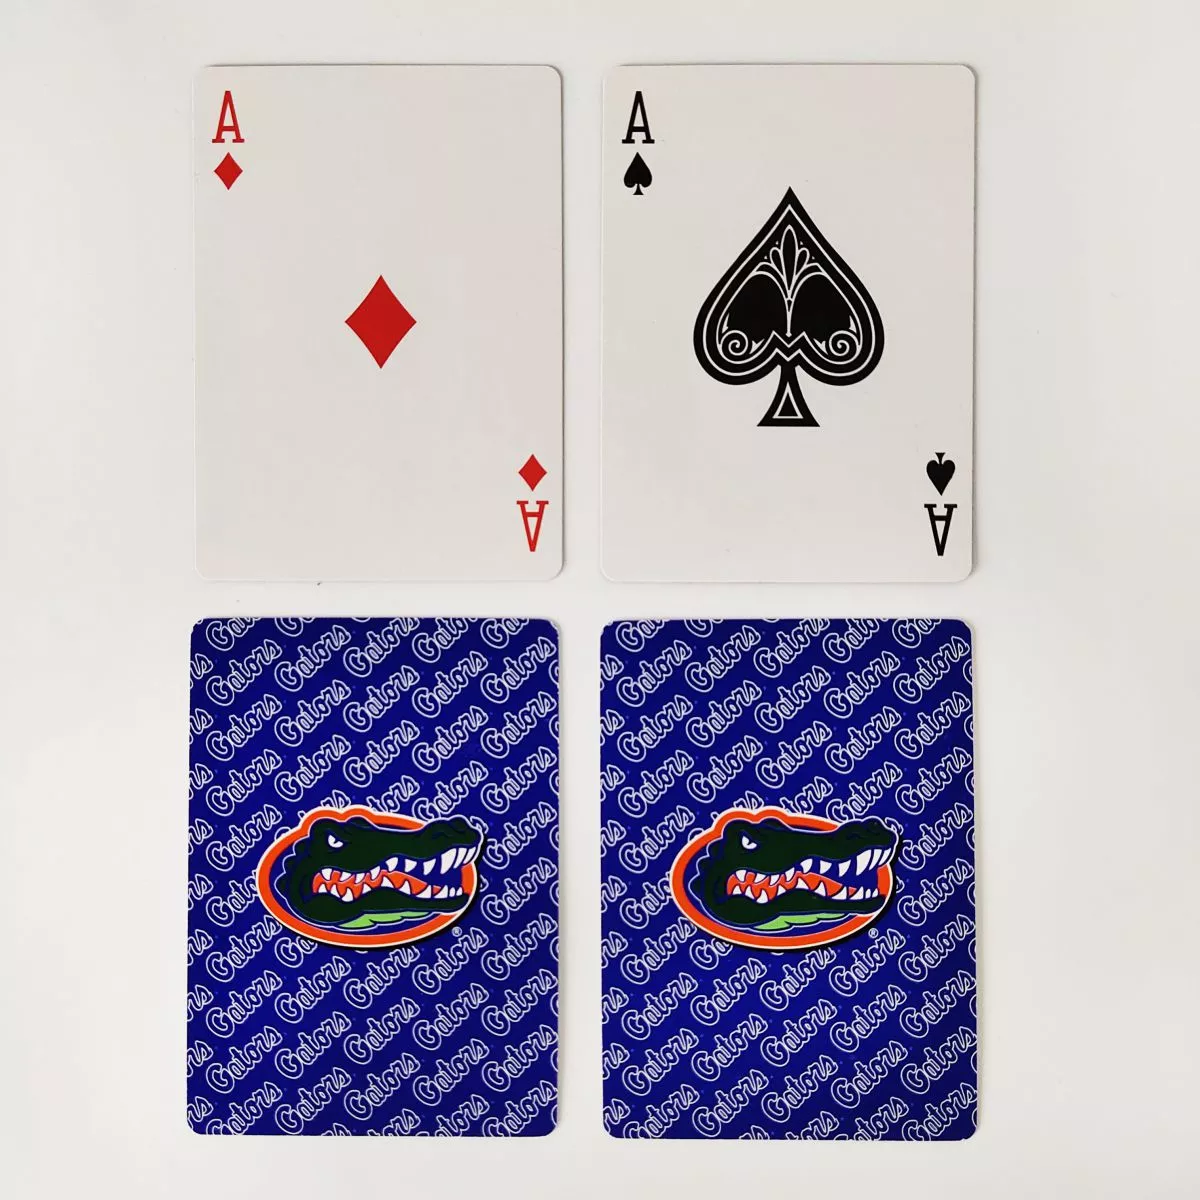 PP005 Playing Cards